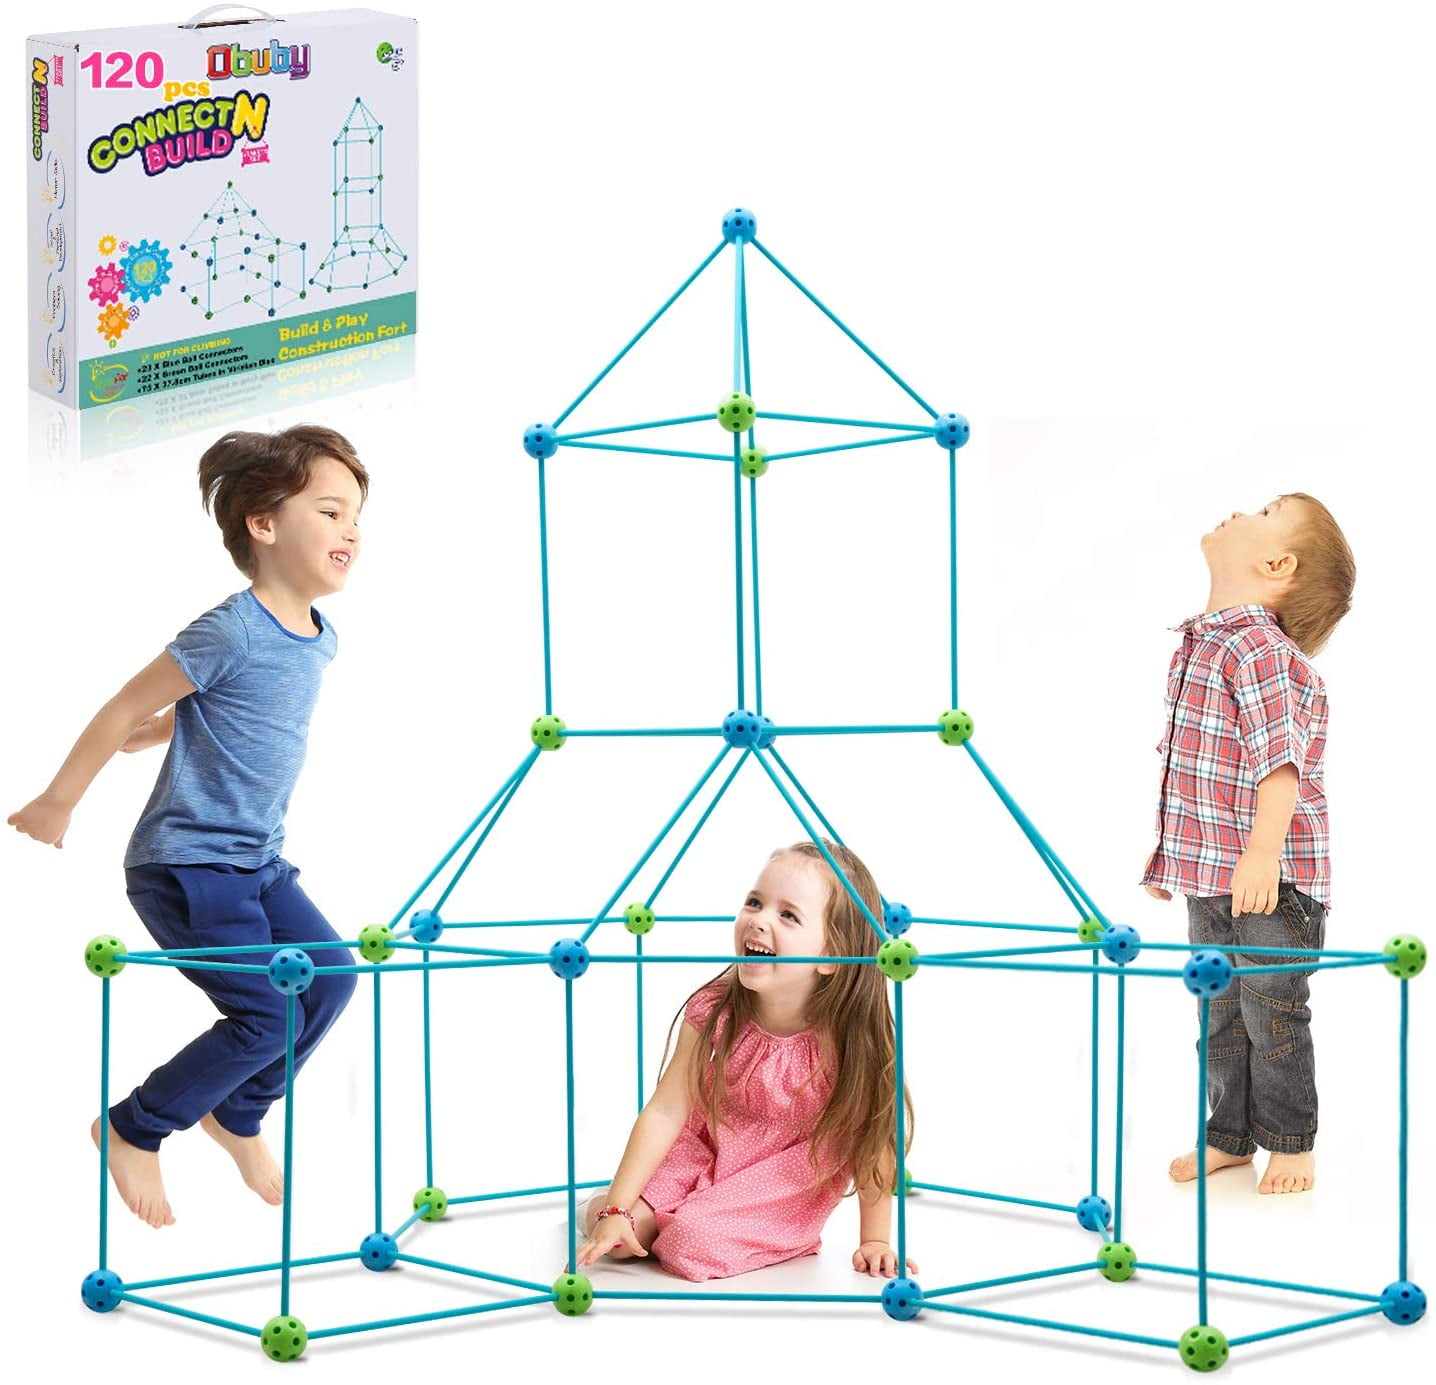 Upgraded Fort Building Kit 130pcs Glow in The Dark Toys STEM Kids Toys for 6 7 8 9 Year Old Boys Girls Building Toys Indoor Outdoor Toys for Kids Christmas Birthday Gifts for Kids 